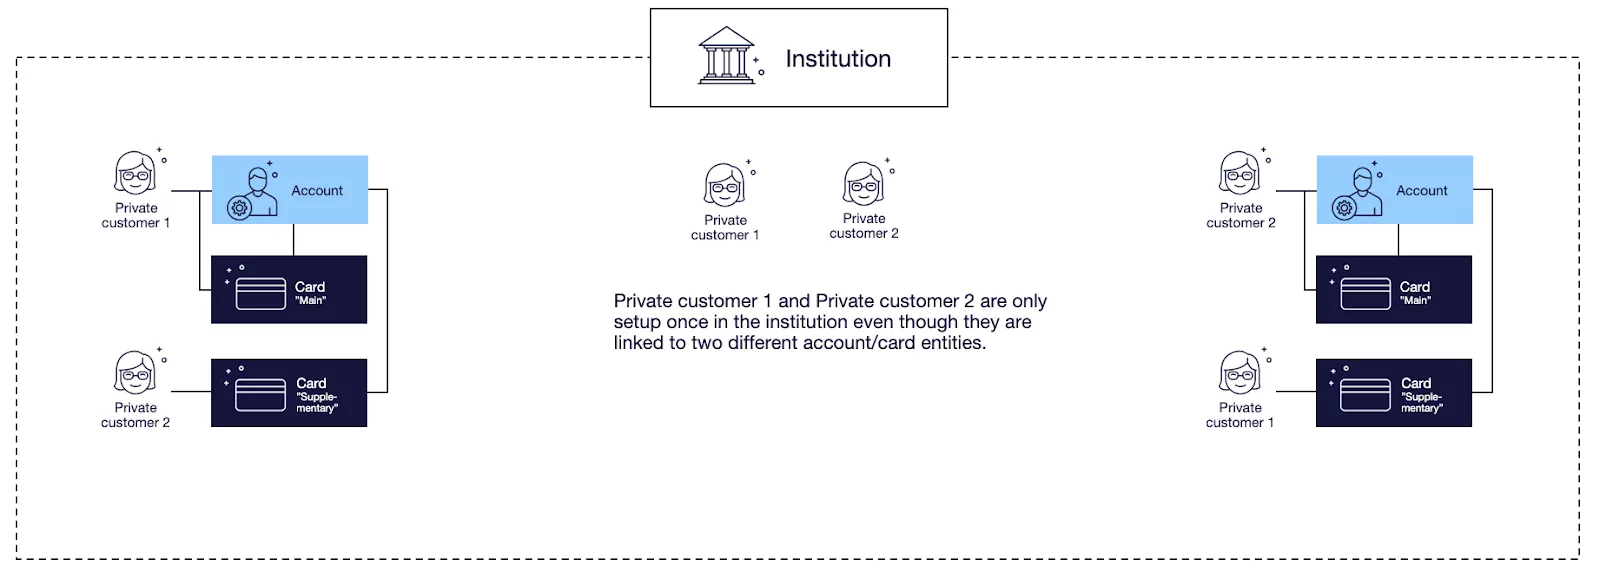 An example of customer information